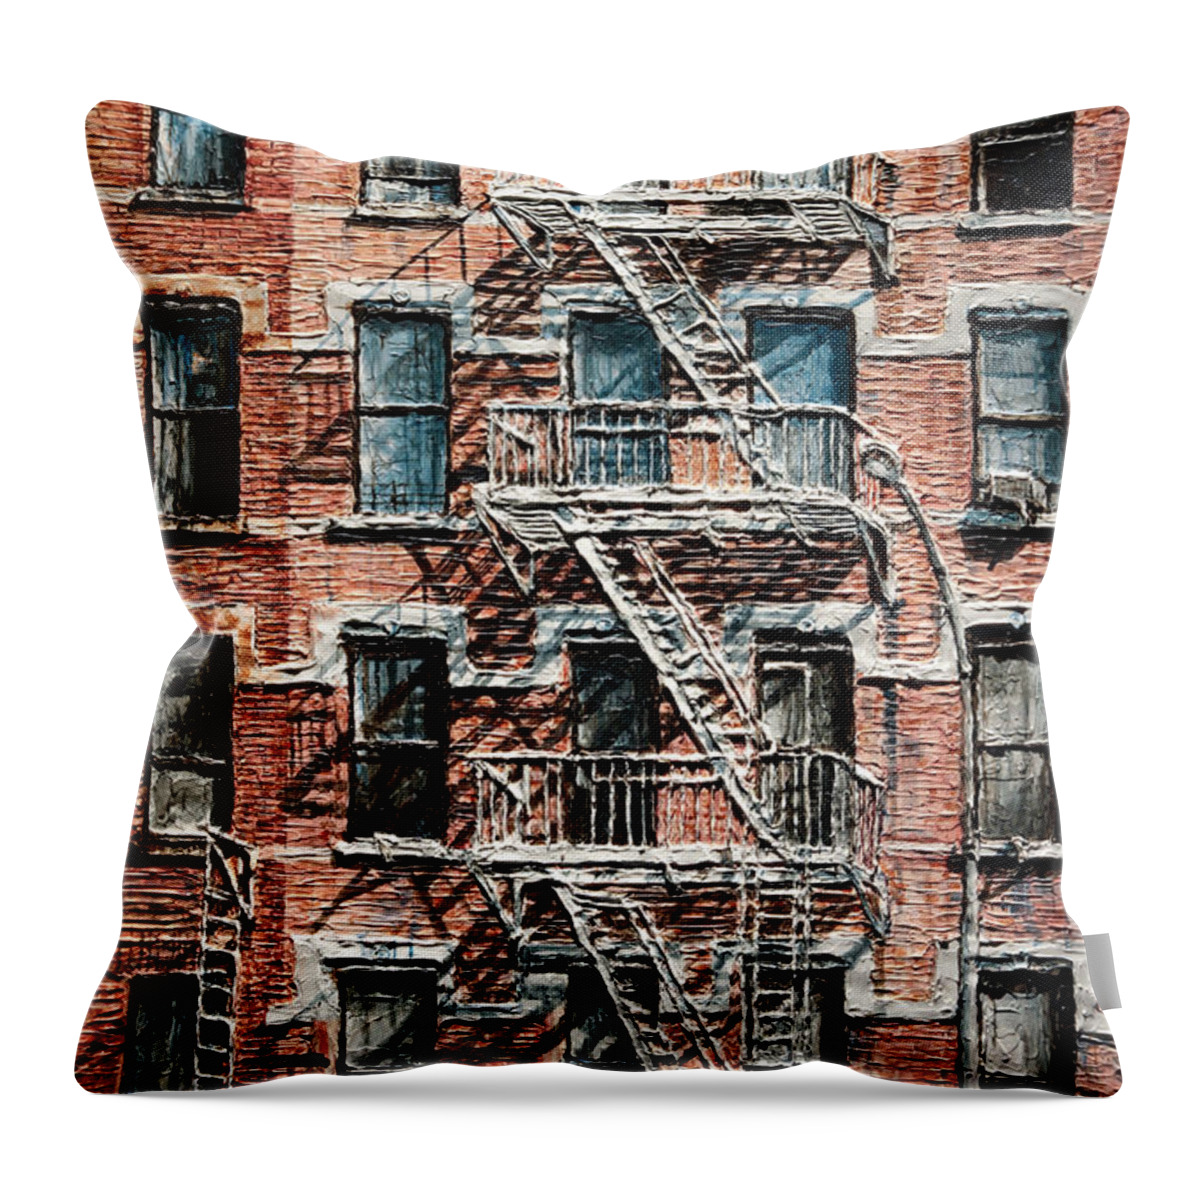 Nyc Throw Pillow featuring the painting N Y C Apartment On 9th Ave by Joey Agbayani